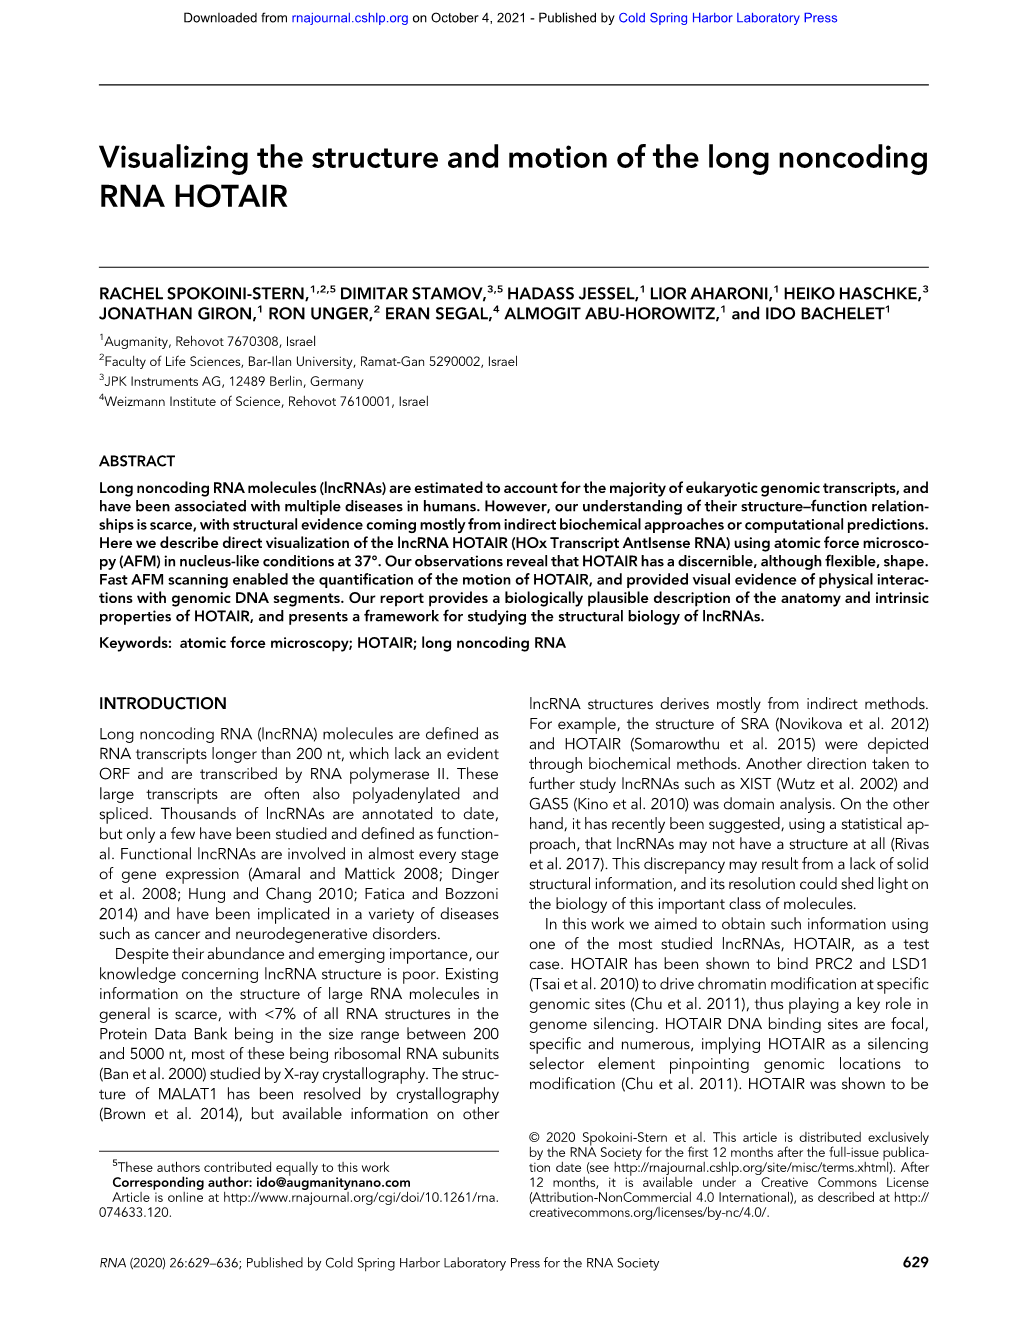 Visualizing the Structure and Motion of the Long Noncoding RNA HOTAIR